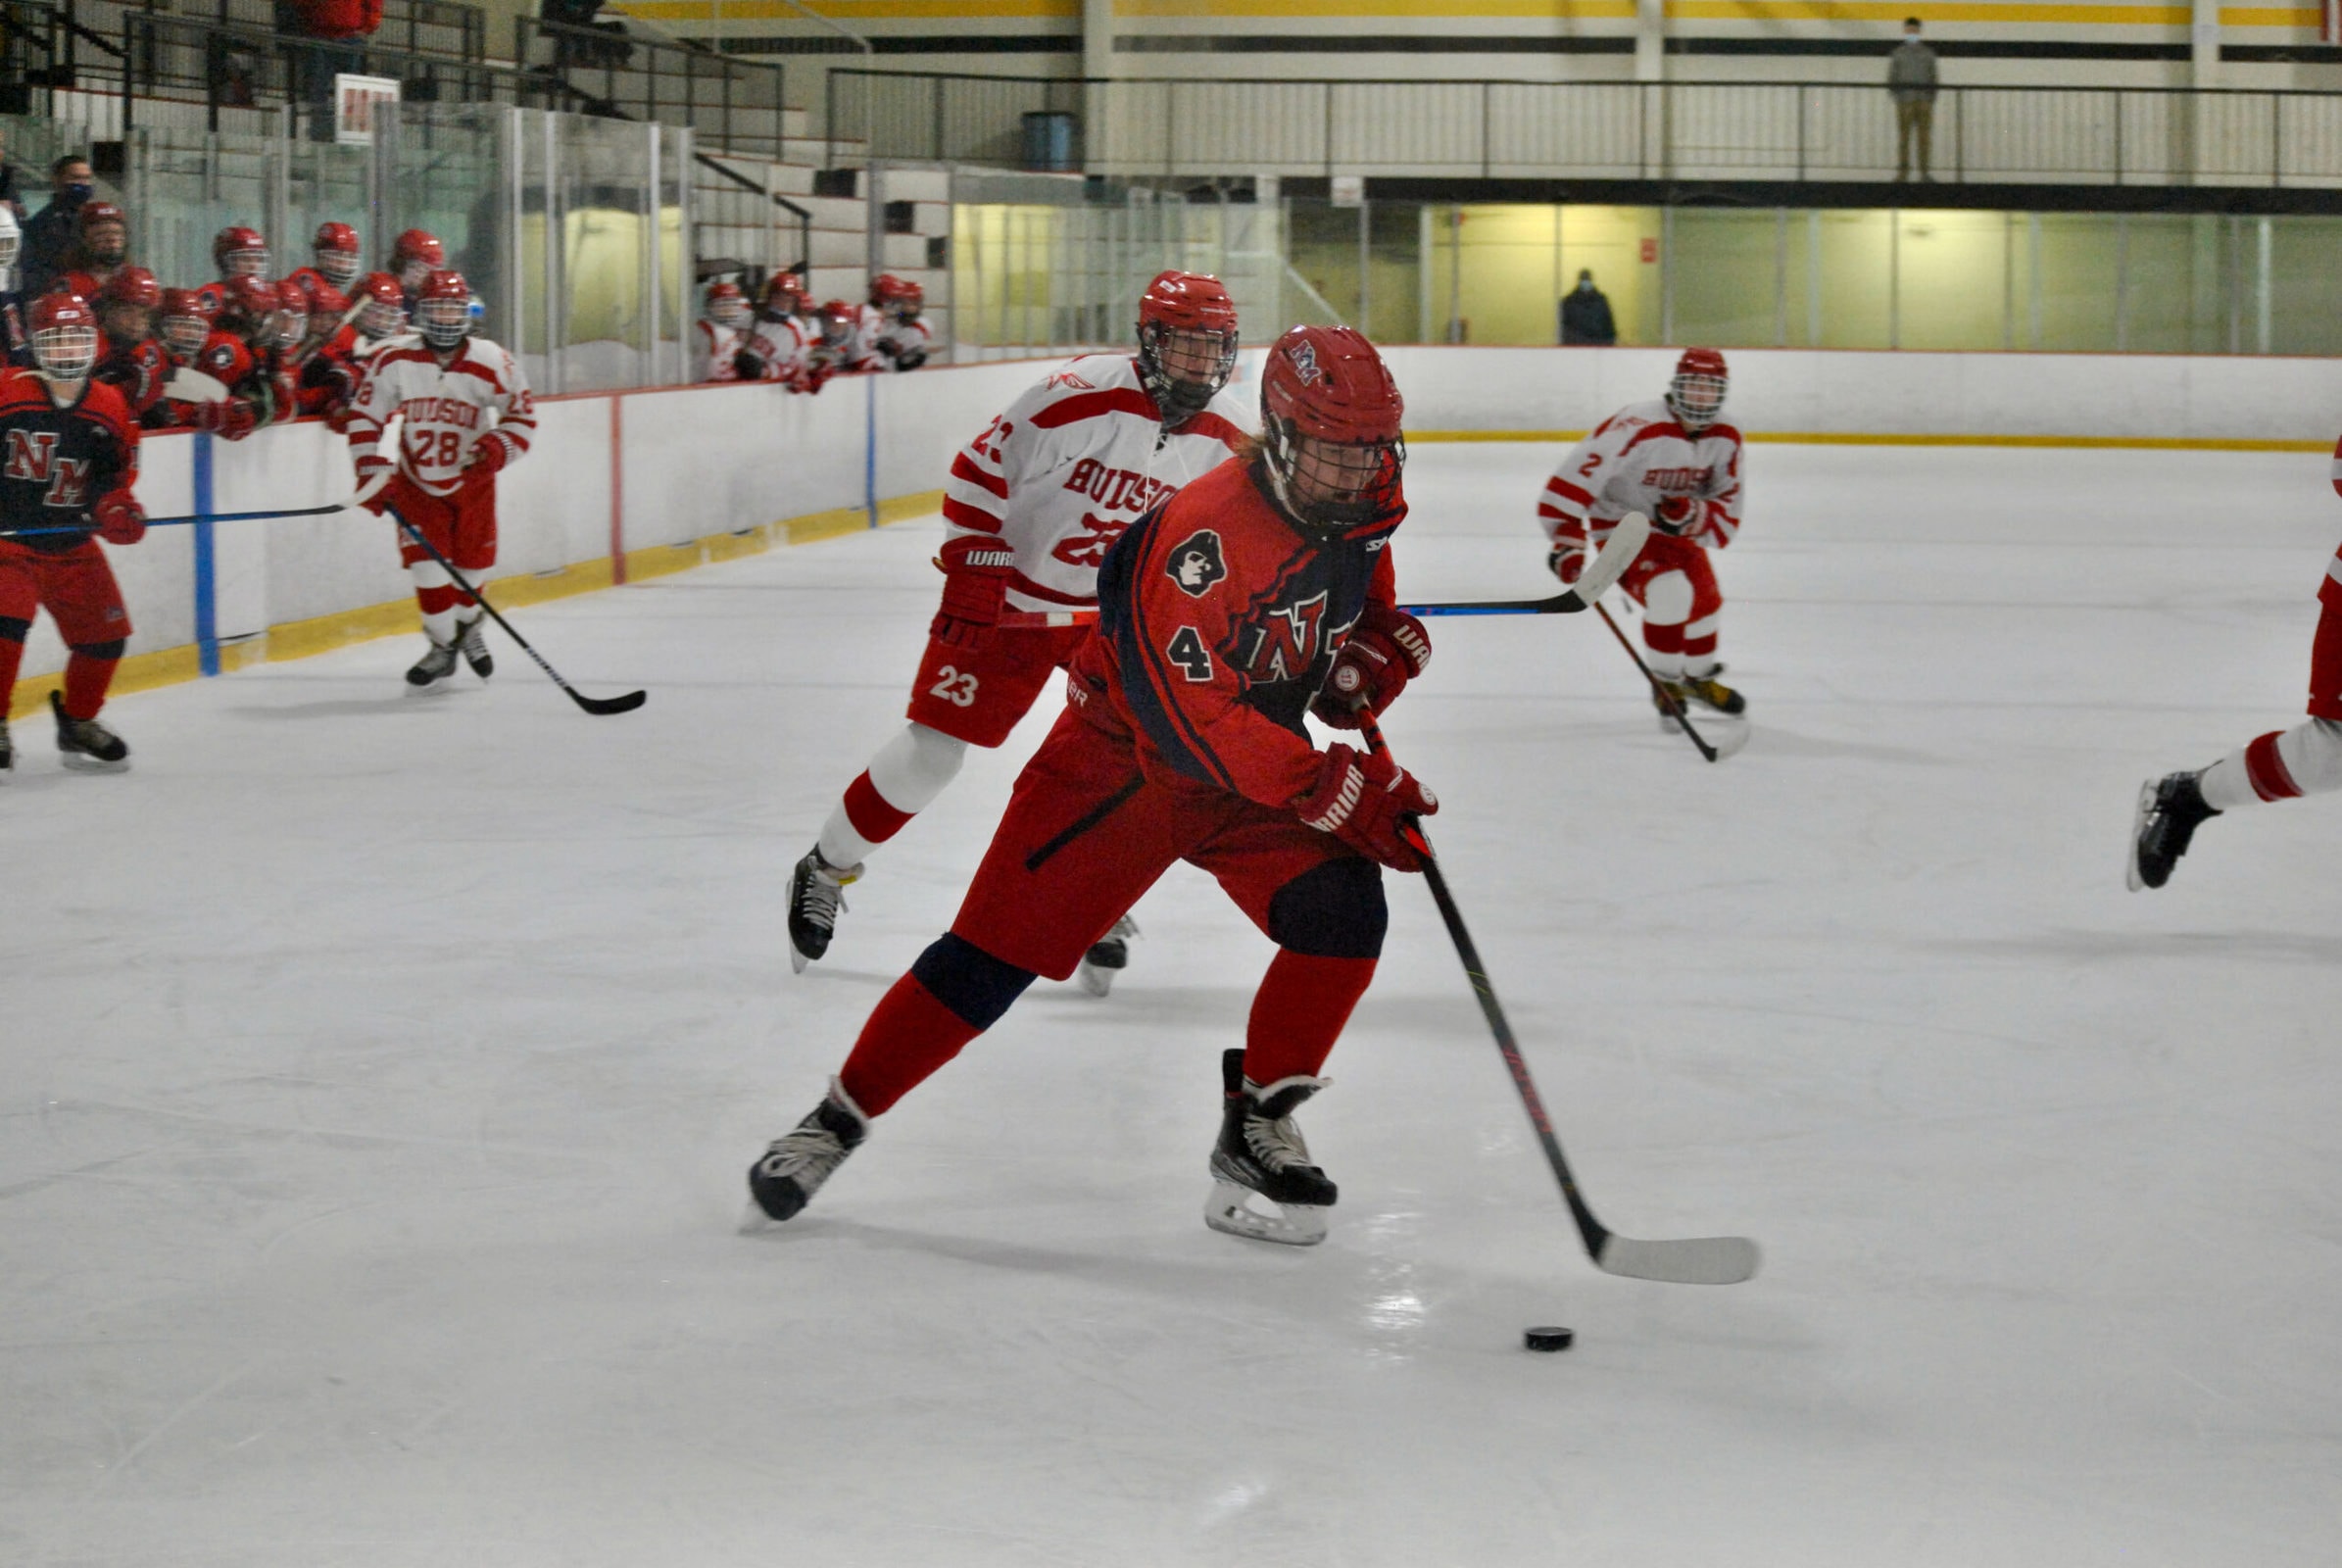 Hudson sophomore scores milestone goals in boys hockey loss to North Middlesex